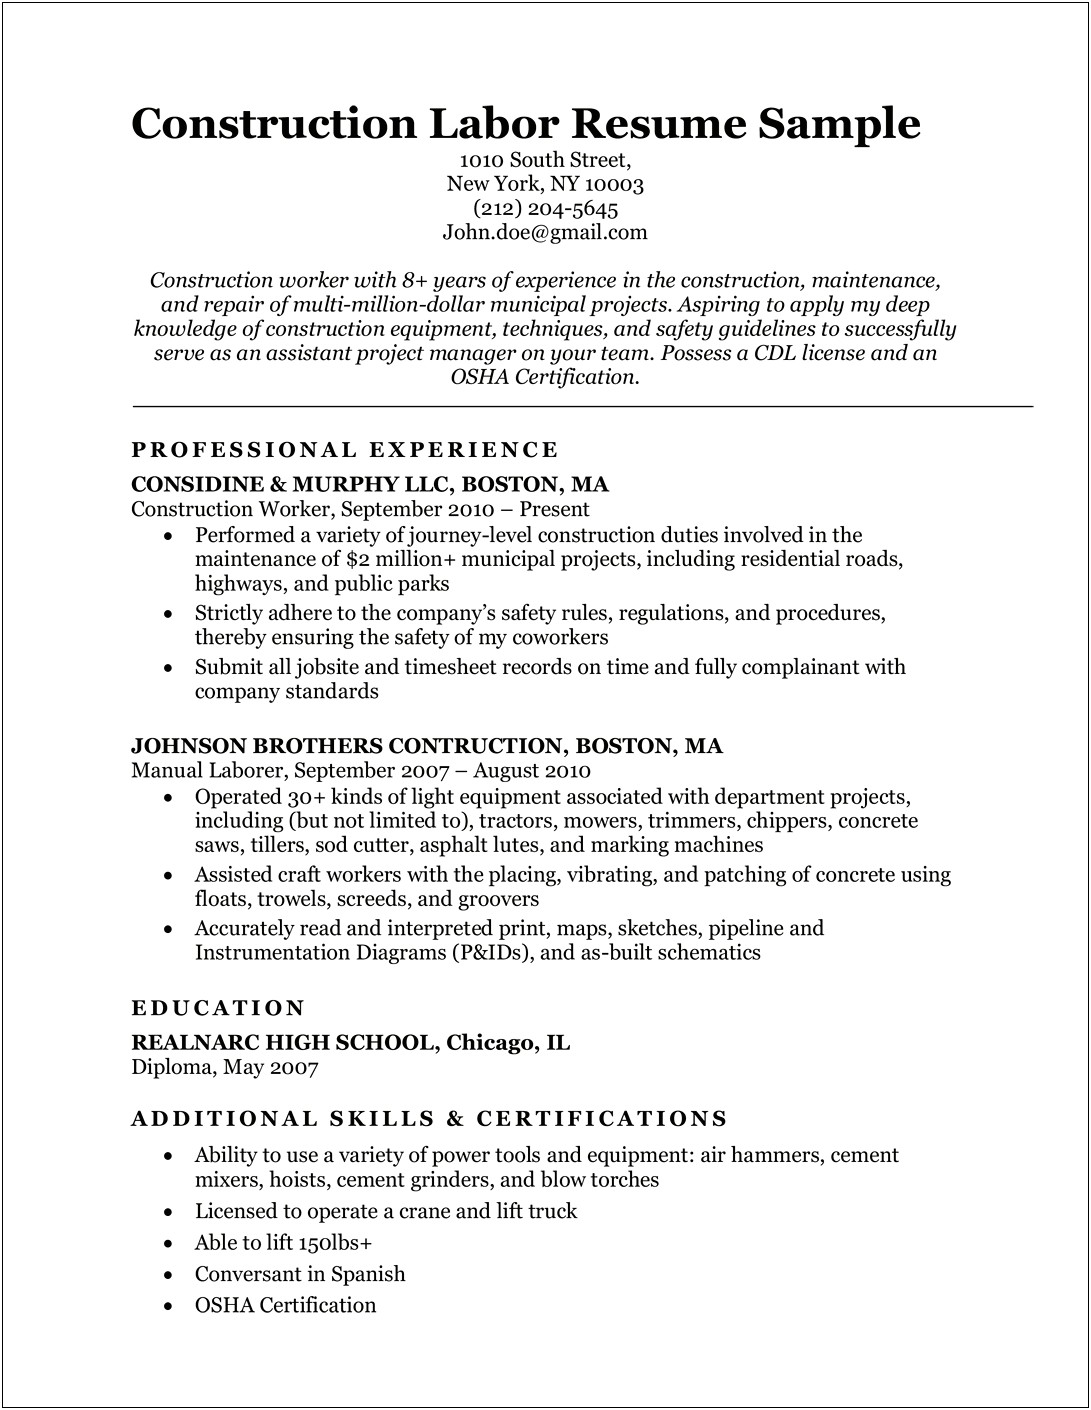 Skills Of A Construction Worker Resume